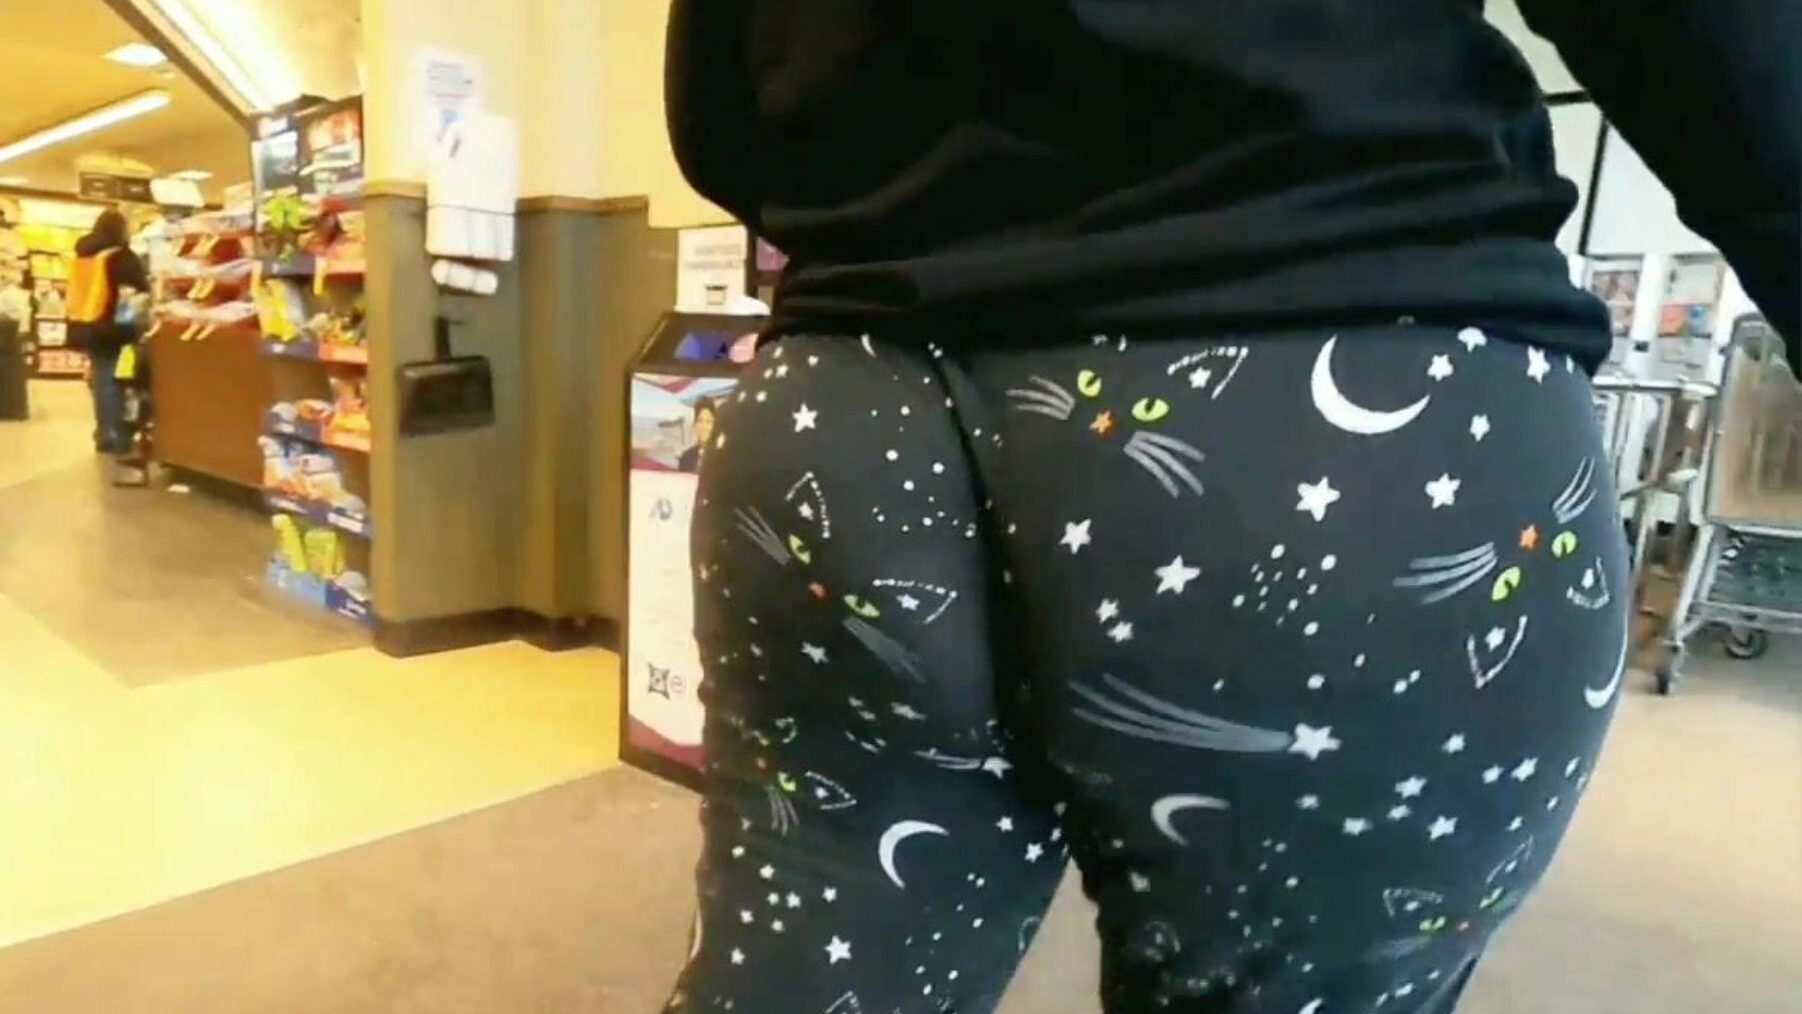 Mom Fat Ass Wedgie At Store